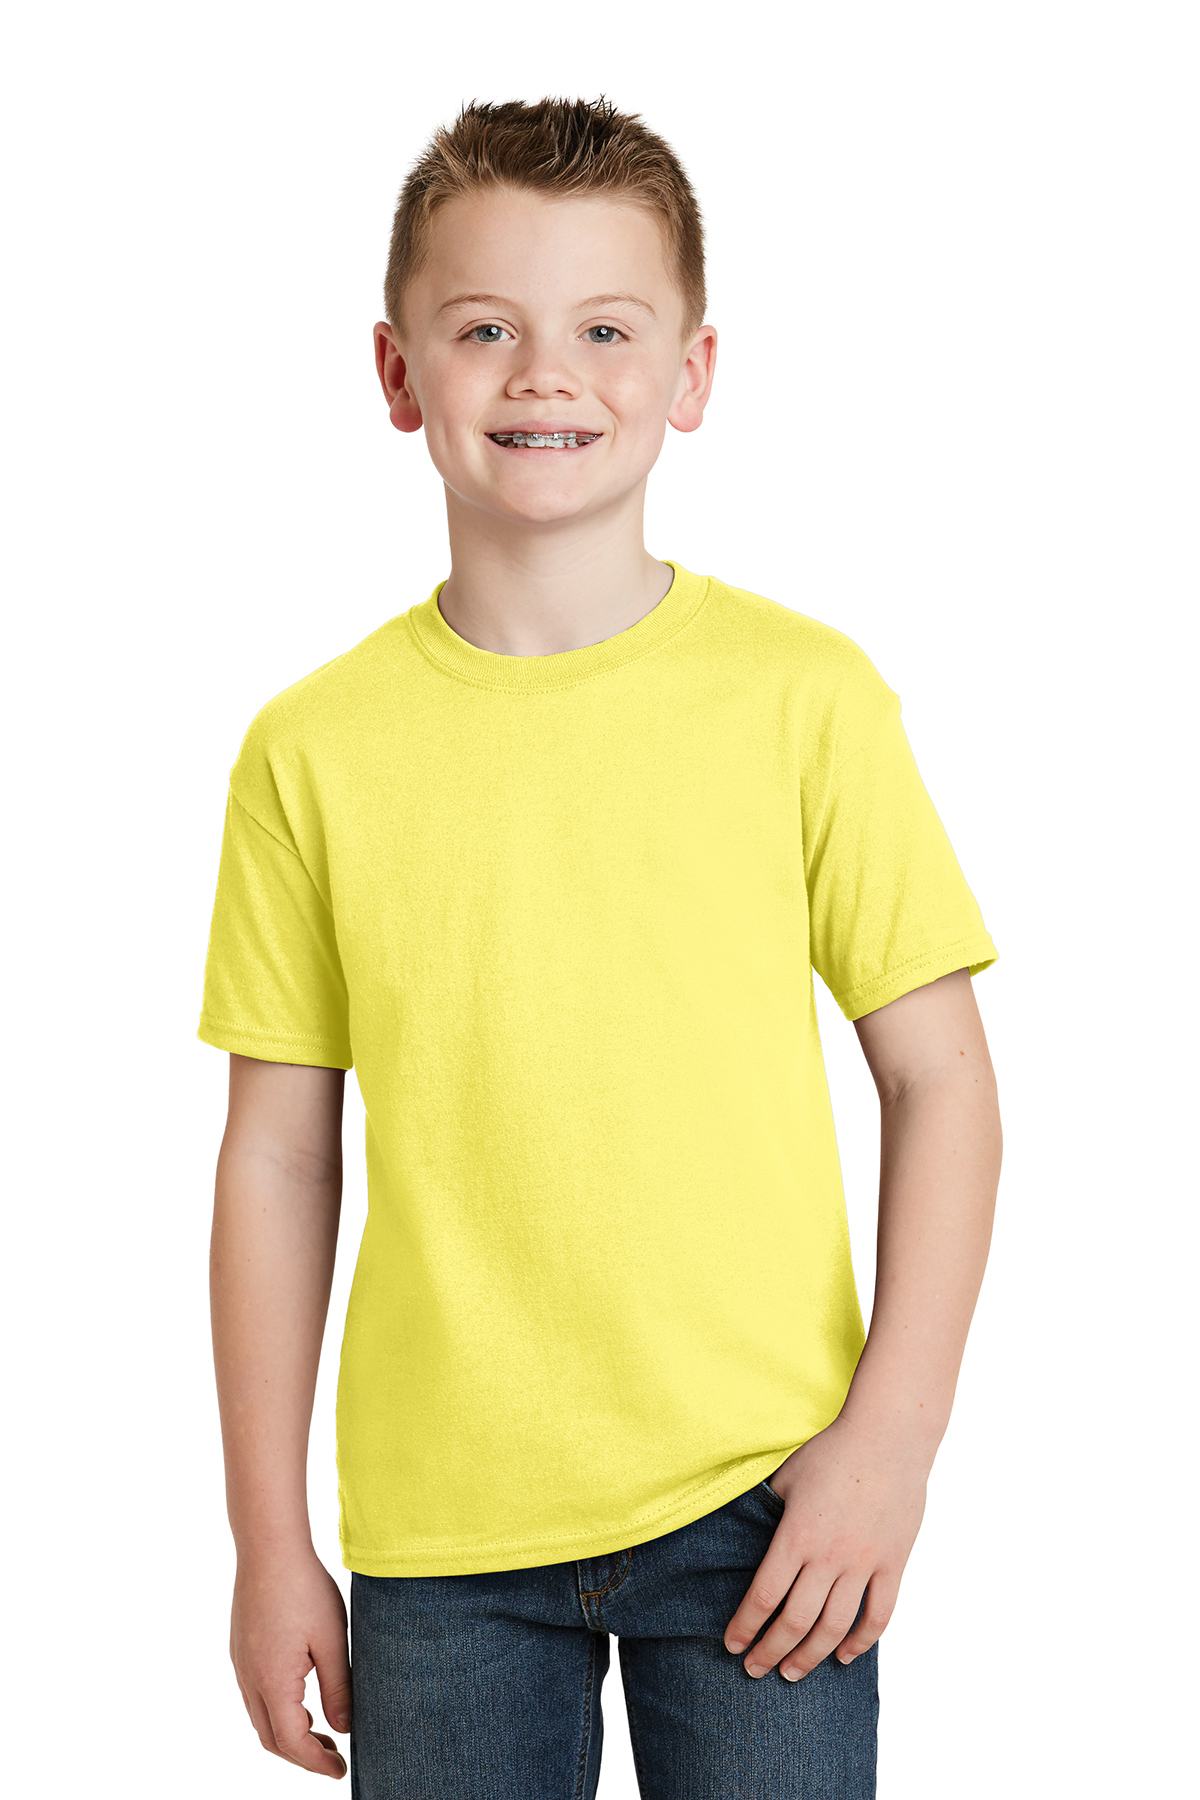 Hanes Youth Ecosmart 50 50 Cotton Poly T Shirt 50 50 Blend